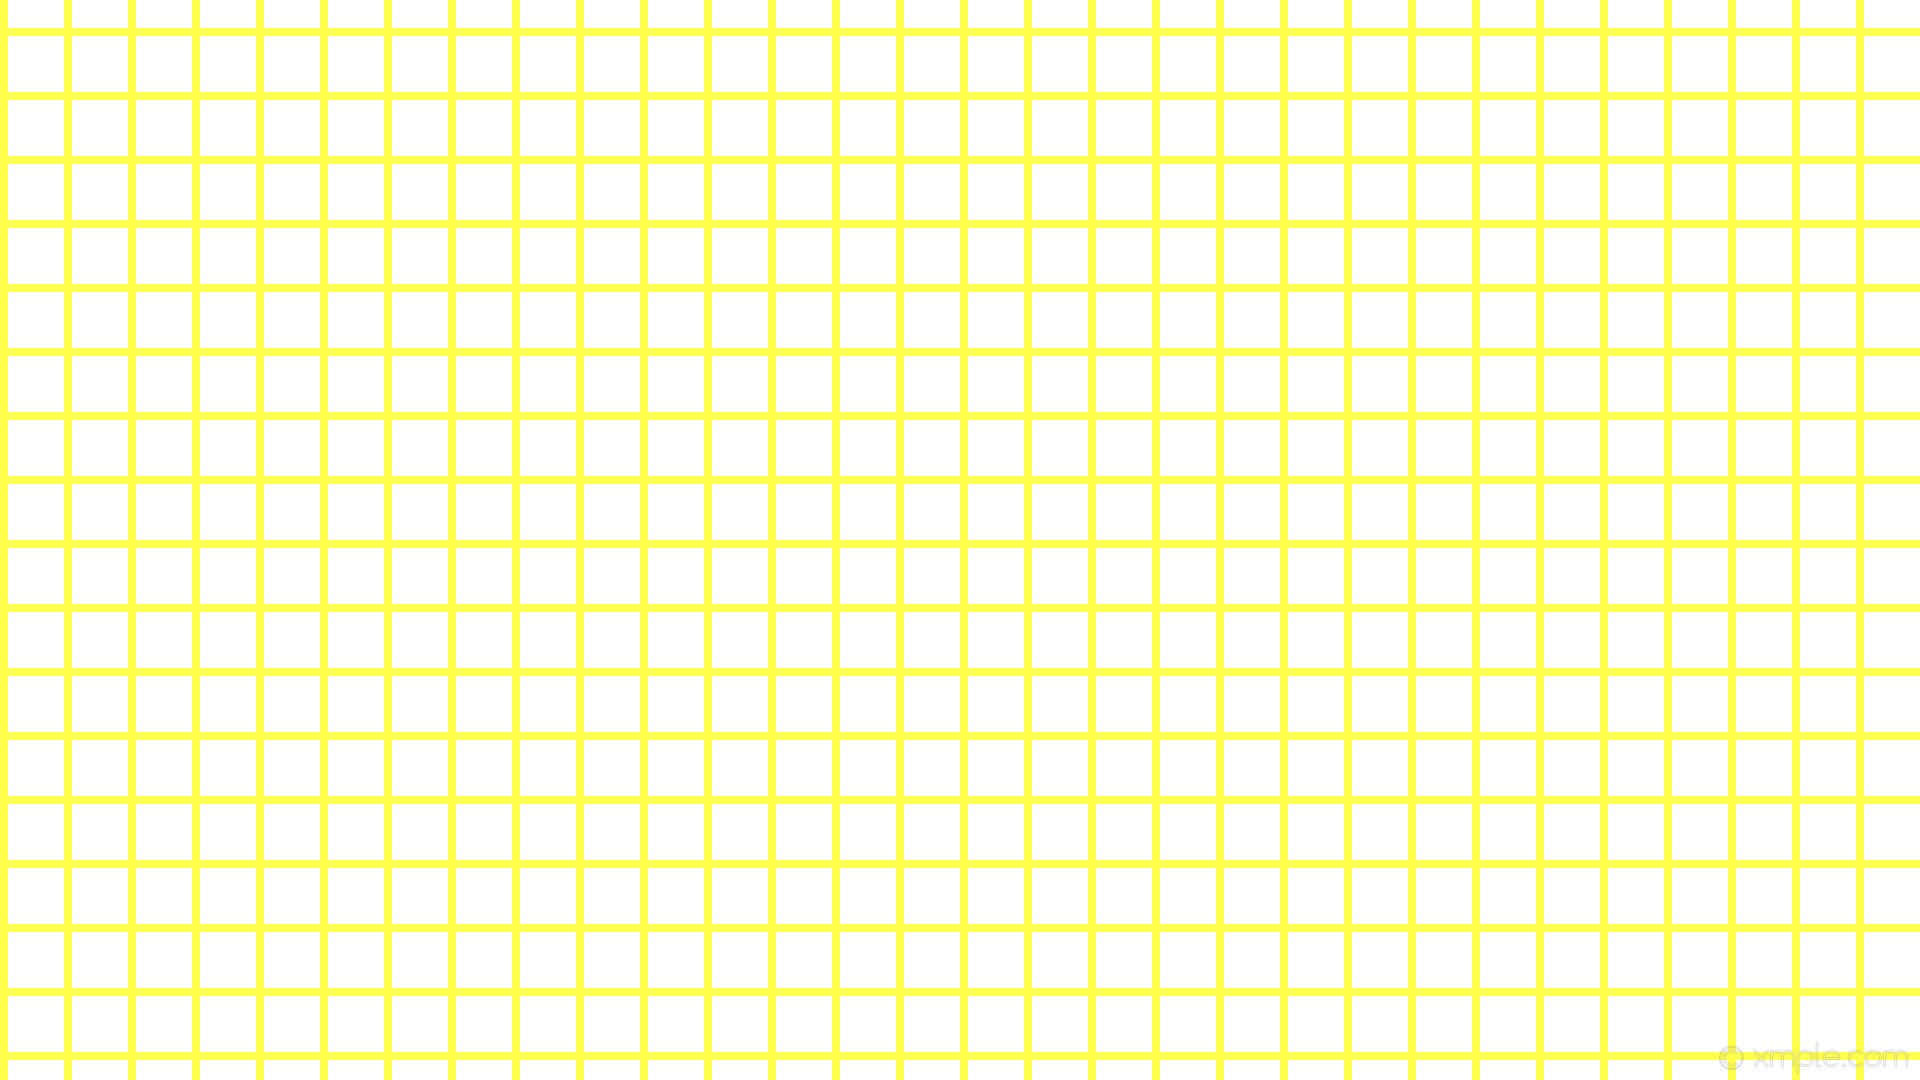 Aesthetic yellow plaid, perfect for adding a modern twist to a classic look. Wallpaper